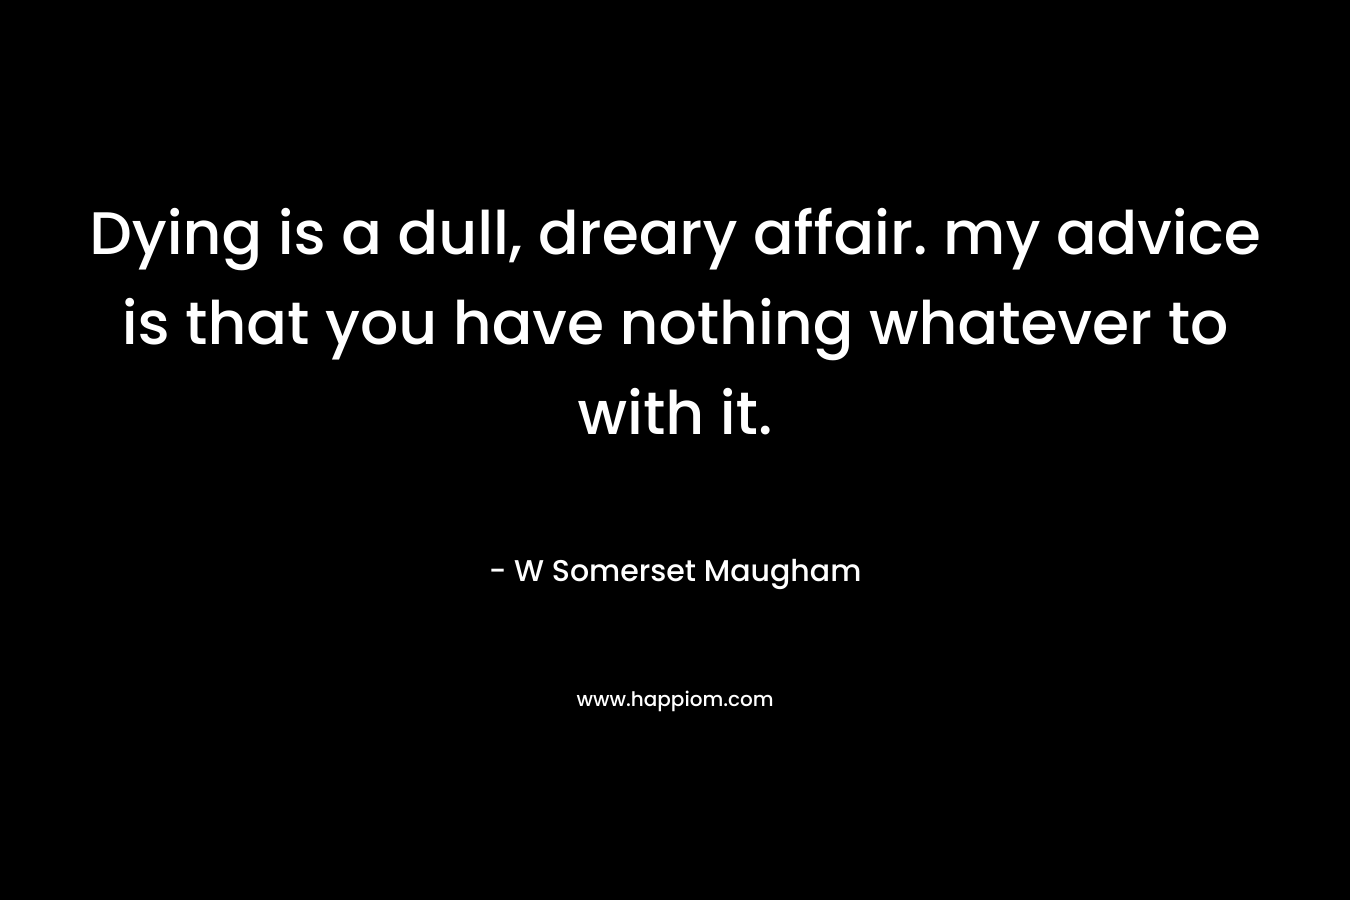 Dying is a dull, dreary affair. my advice is that you have nothing whatever to with it. – W Somerset Maugham